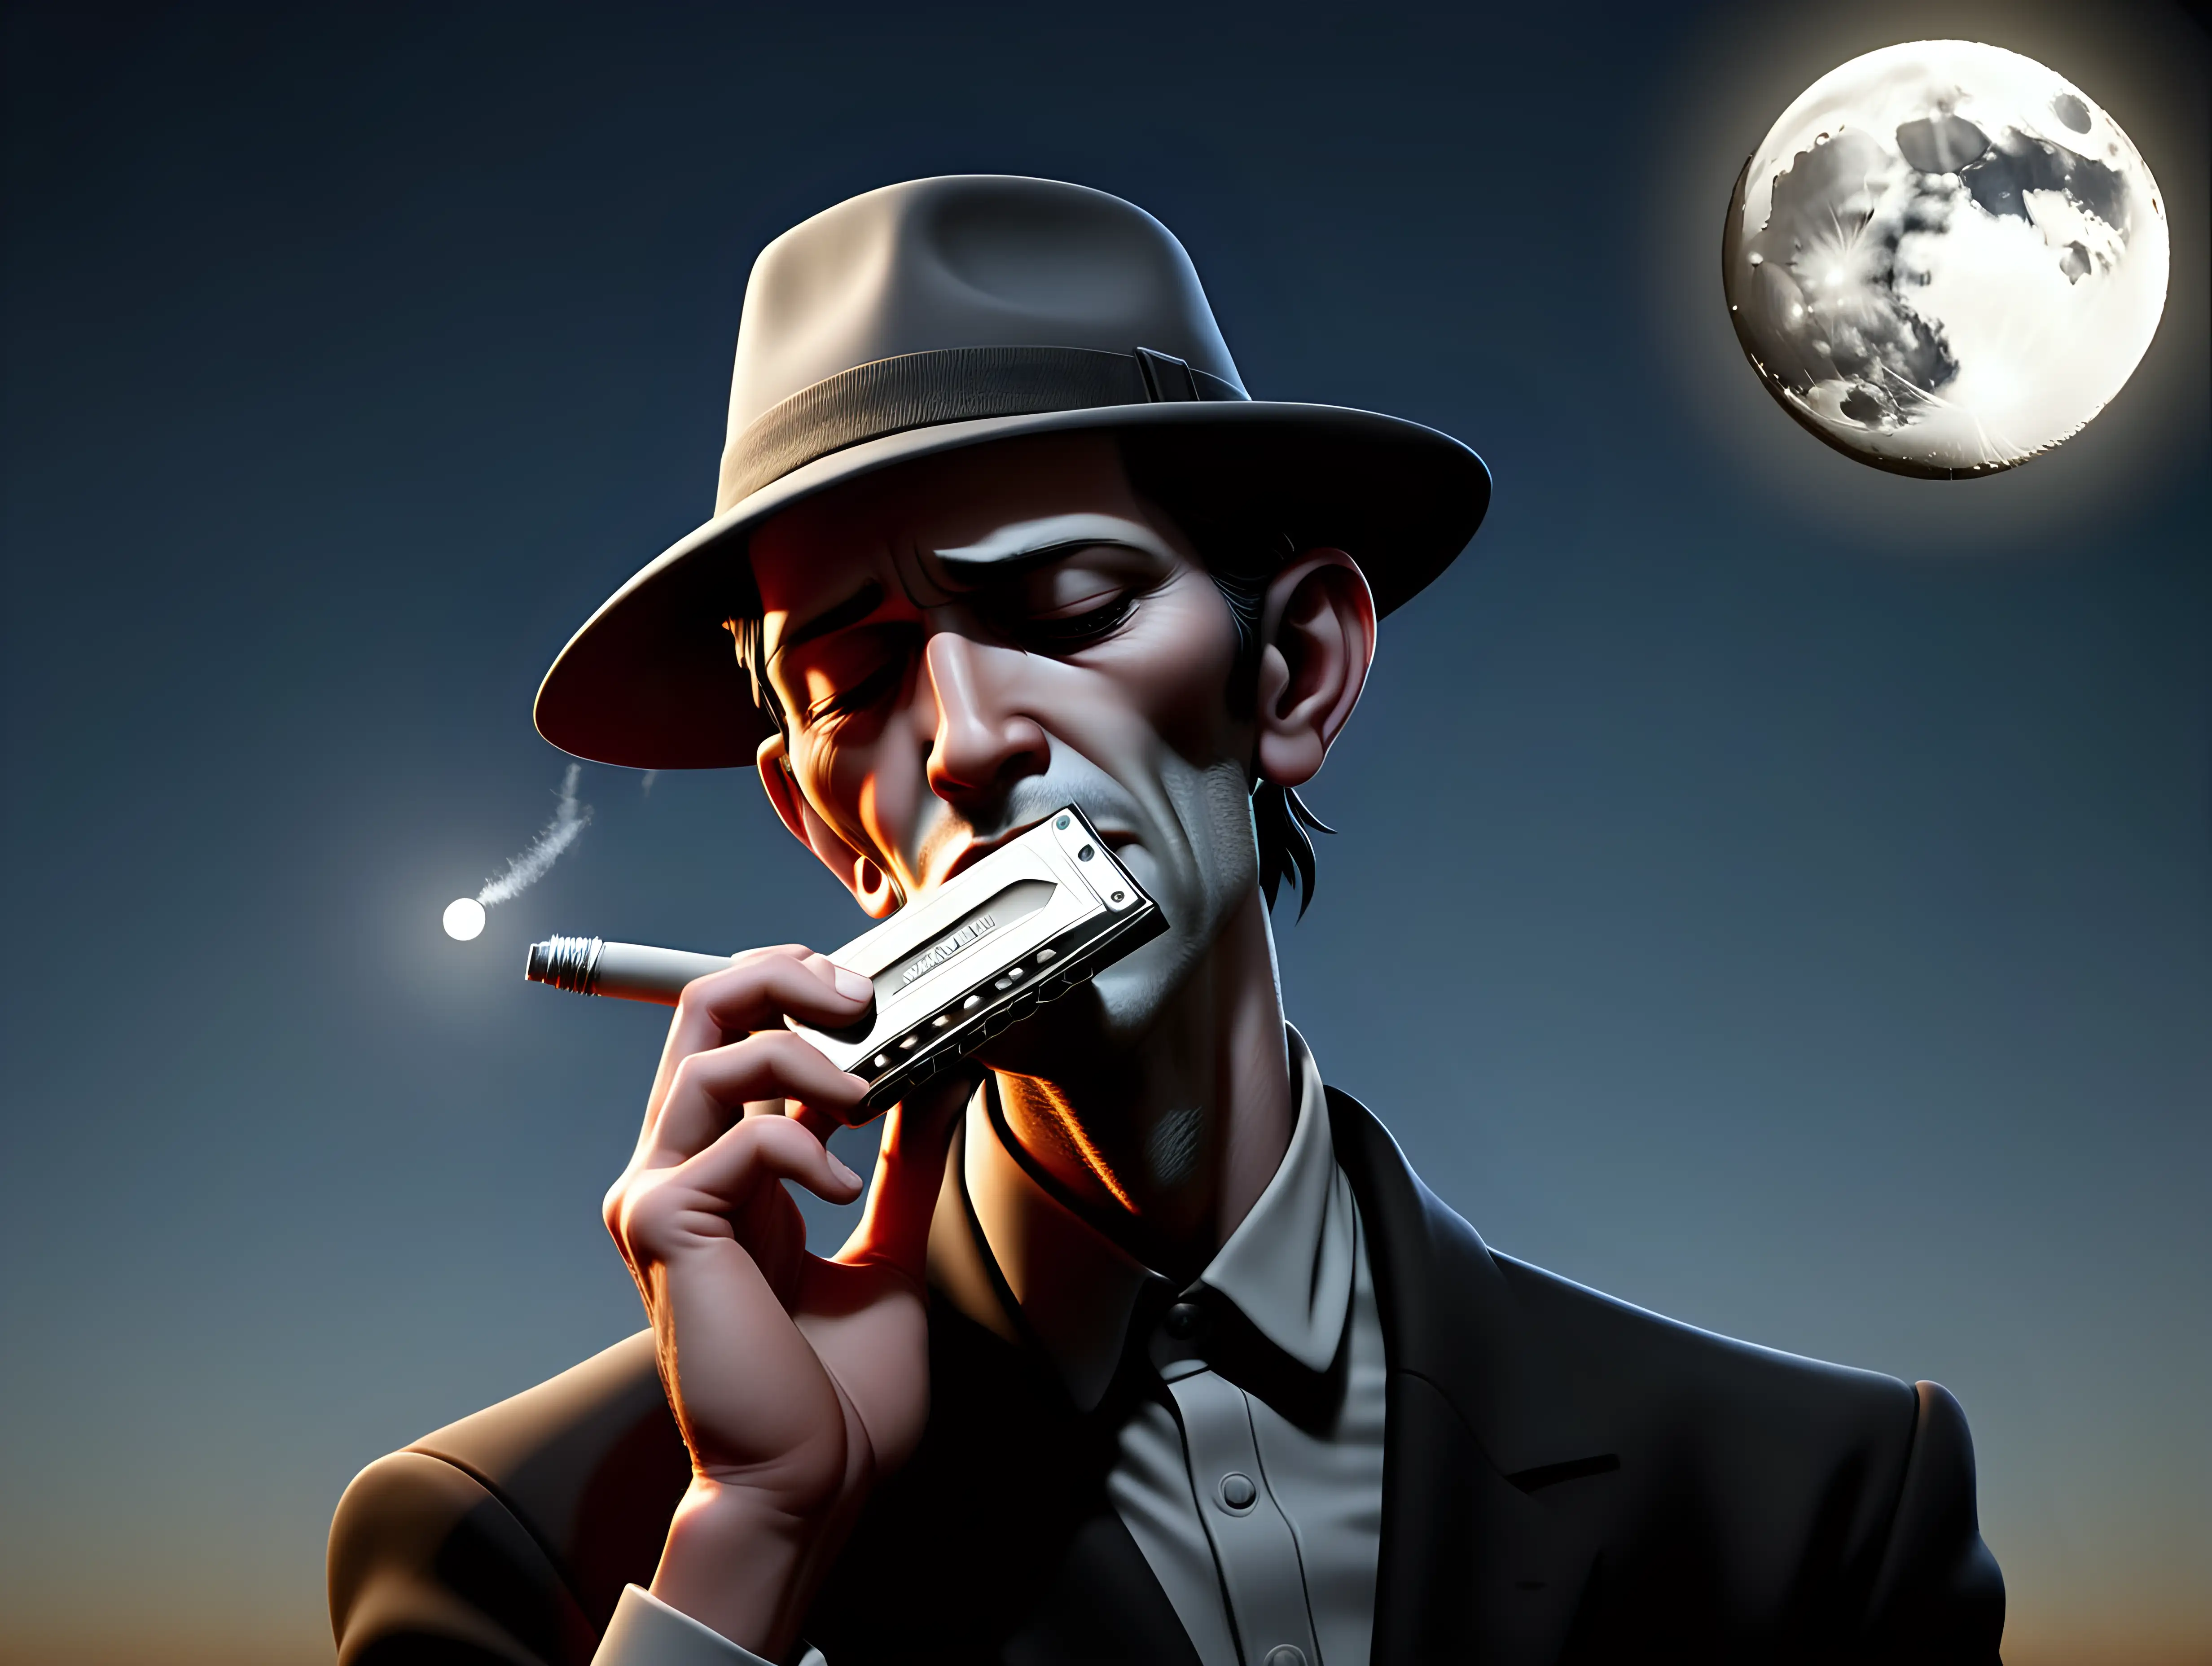 Harmonica player in front of a rising moon